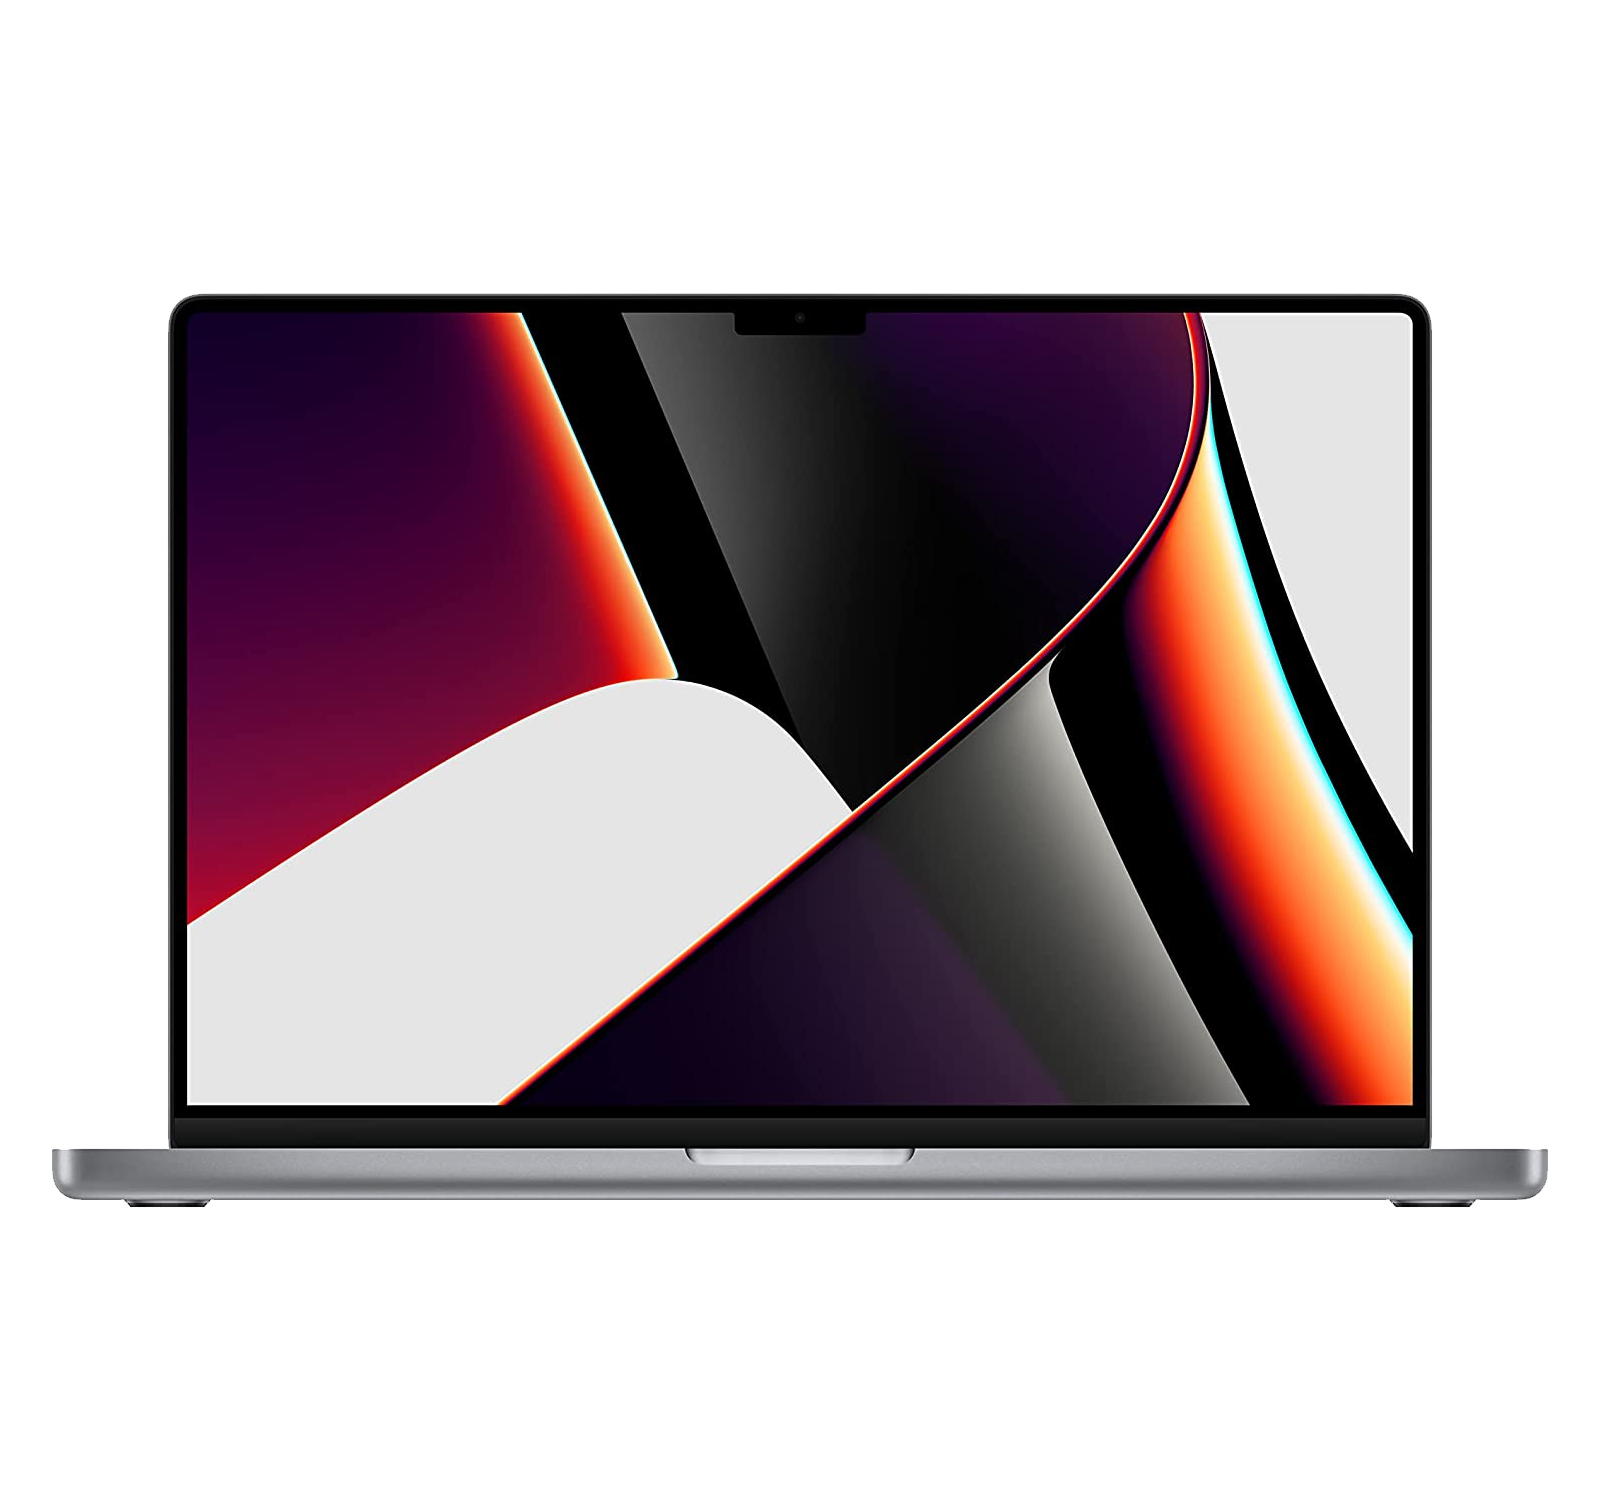 2021 MacBook Pro 16 inch in Space Gray